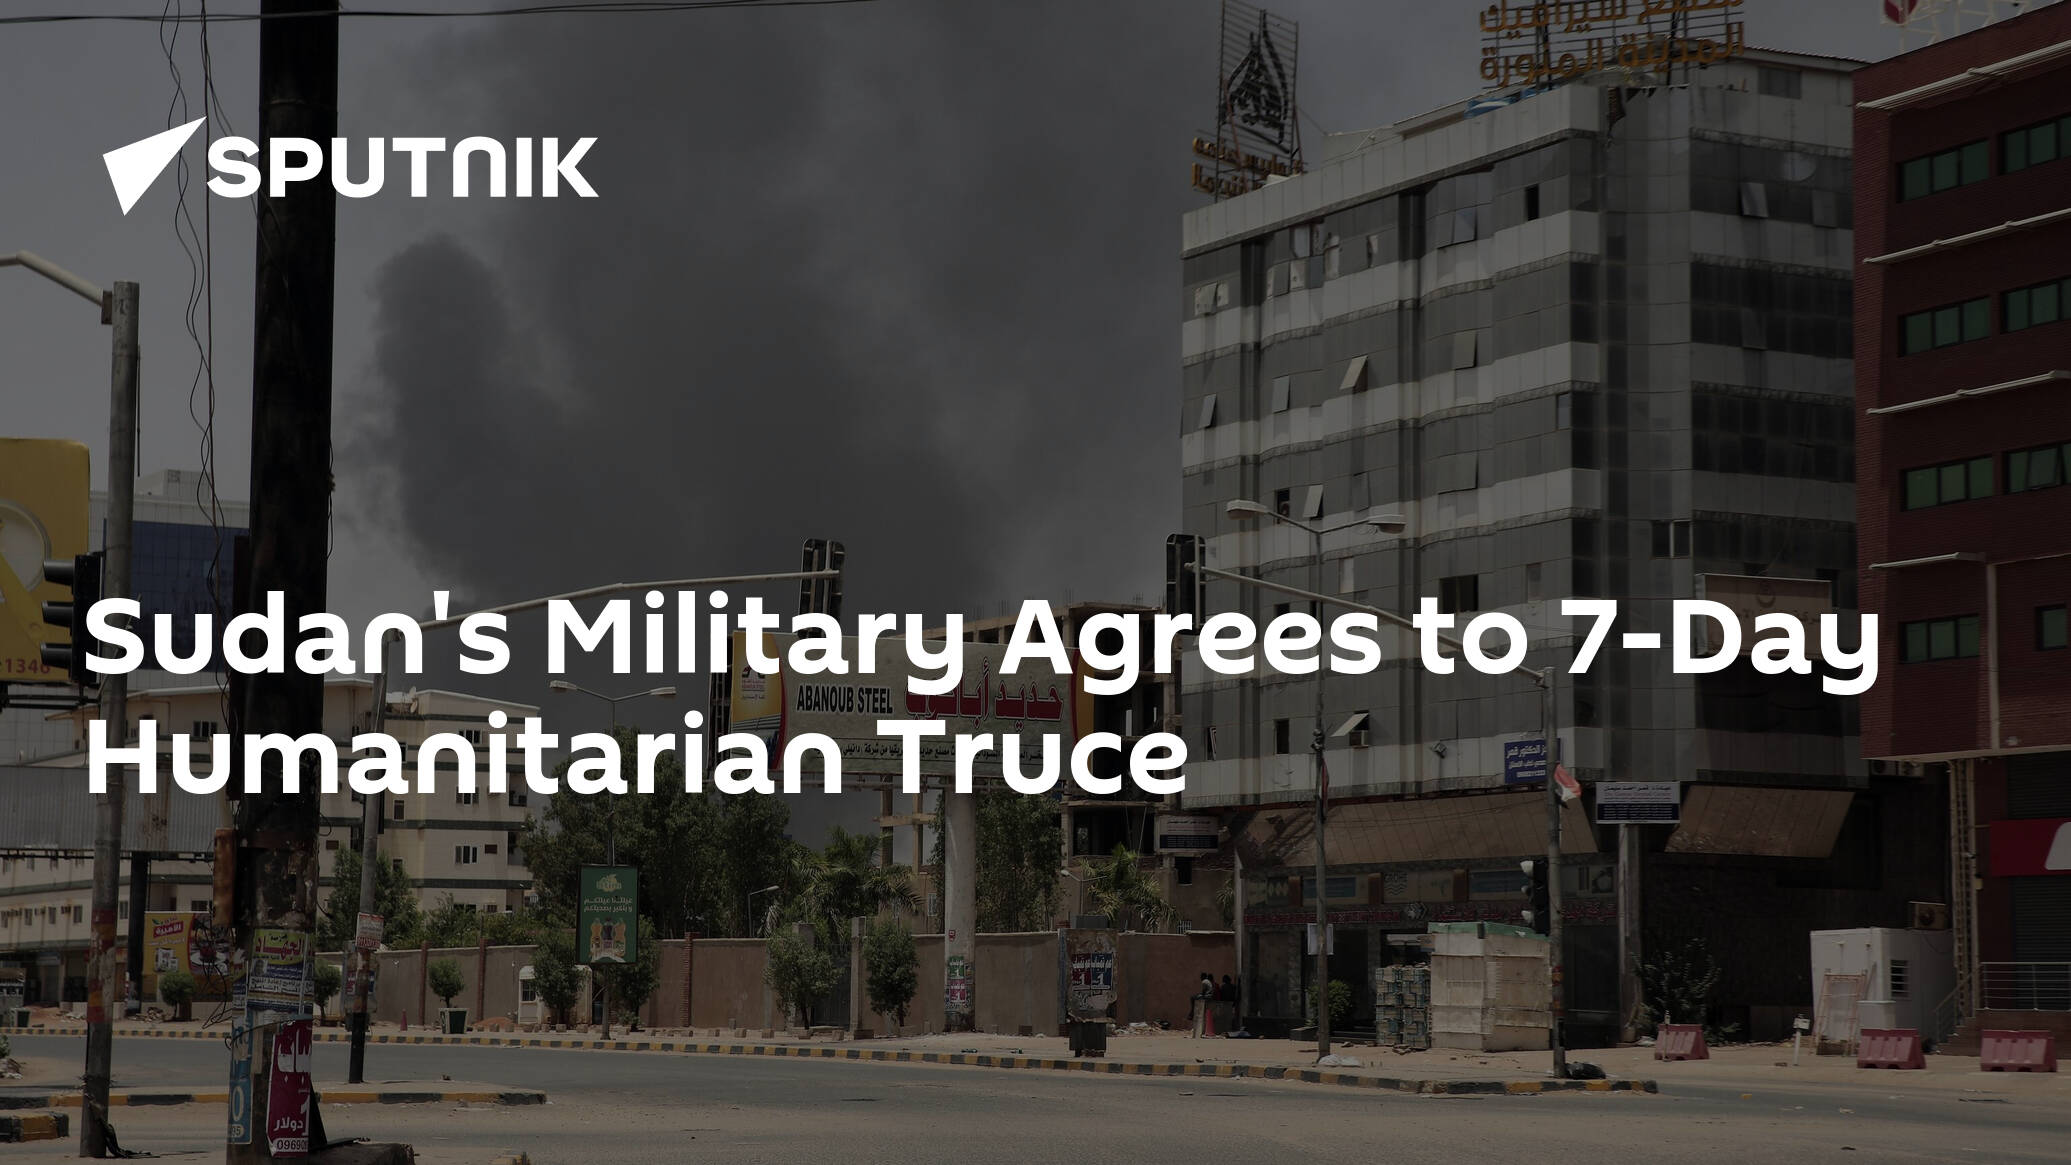 Sudan's Military Agrees to 7-Day Humanitarian Truce